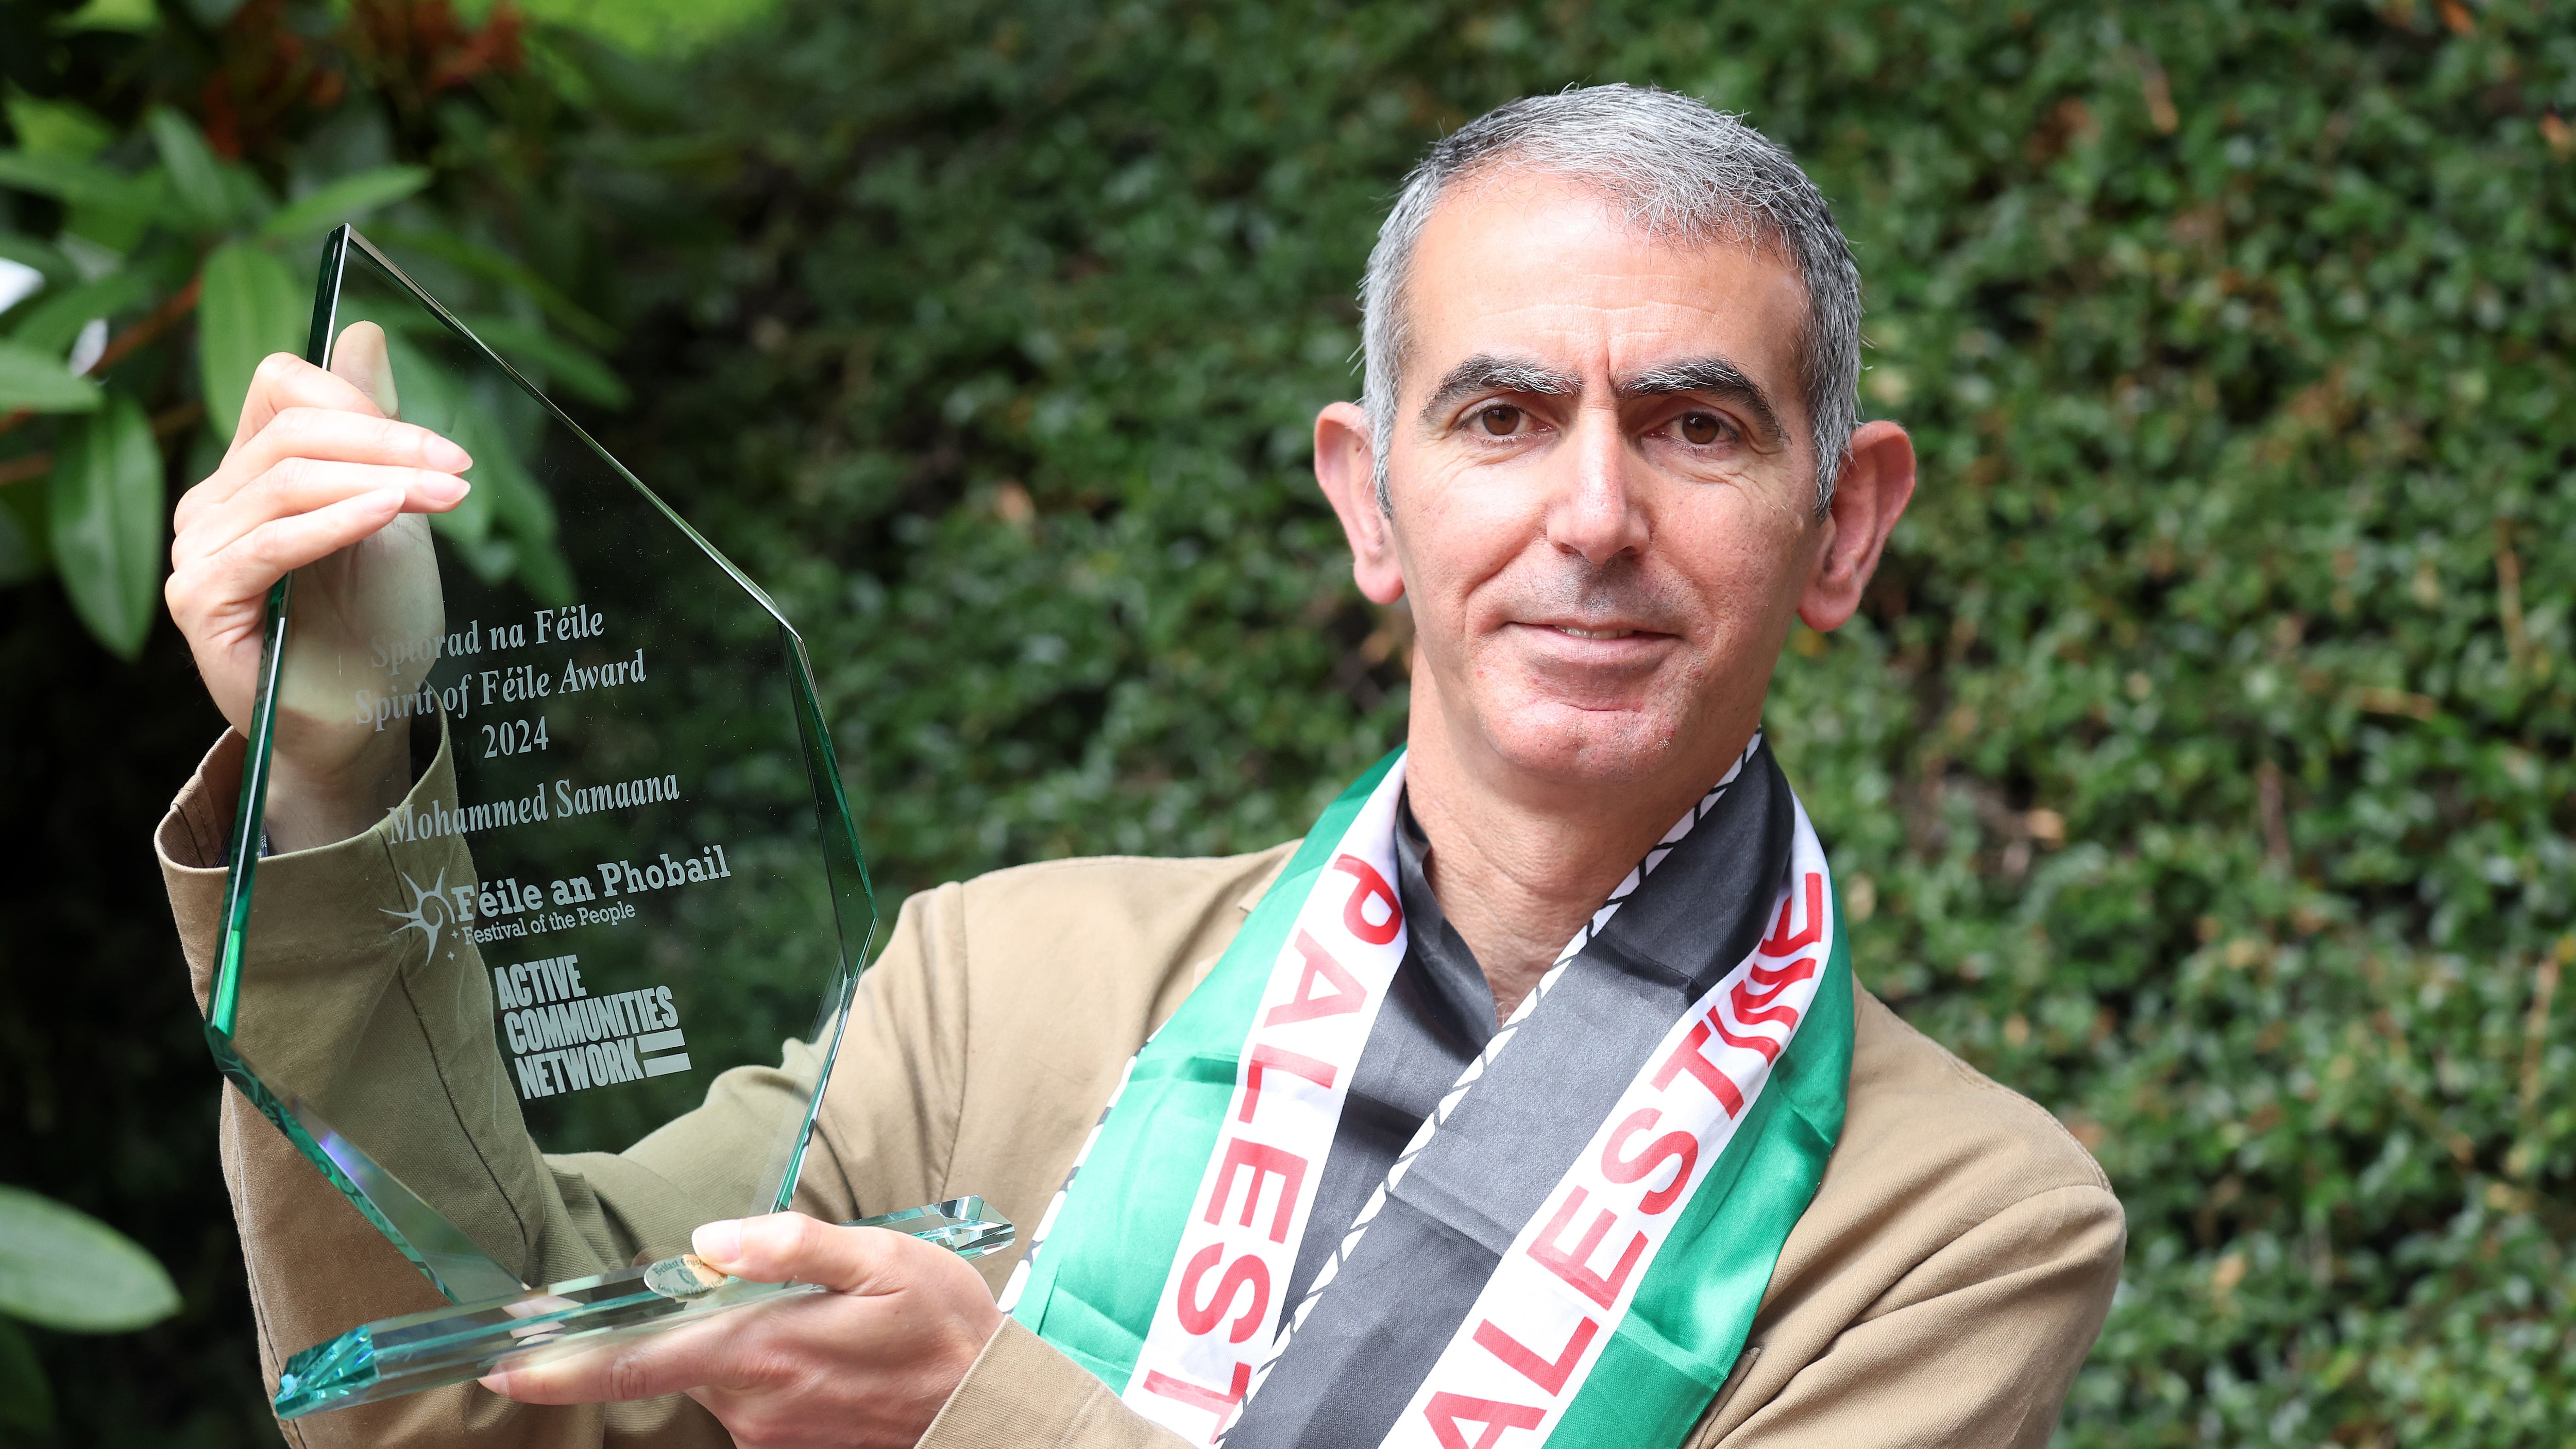 Palestinian born Mohammed Samaana who lives and works in Belfast and campaigns on behalf of the Palestinian people  receives the Spirit of Feile award at the launch of Feile an Phobail in St Marys College. PICTURE: MAL MCCANN